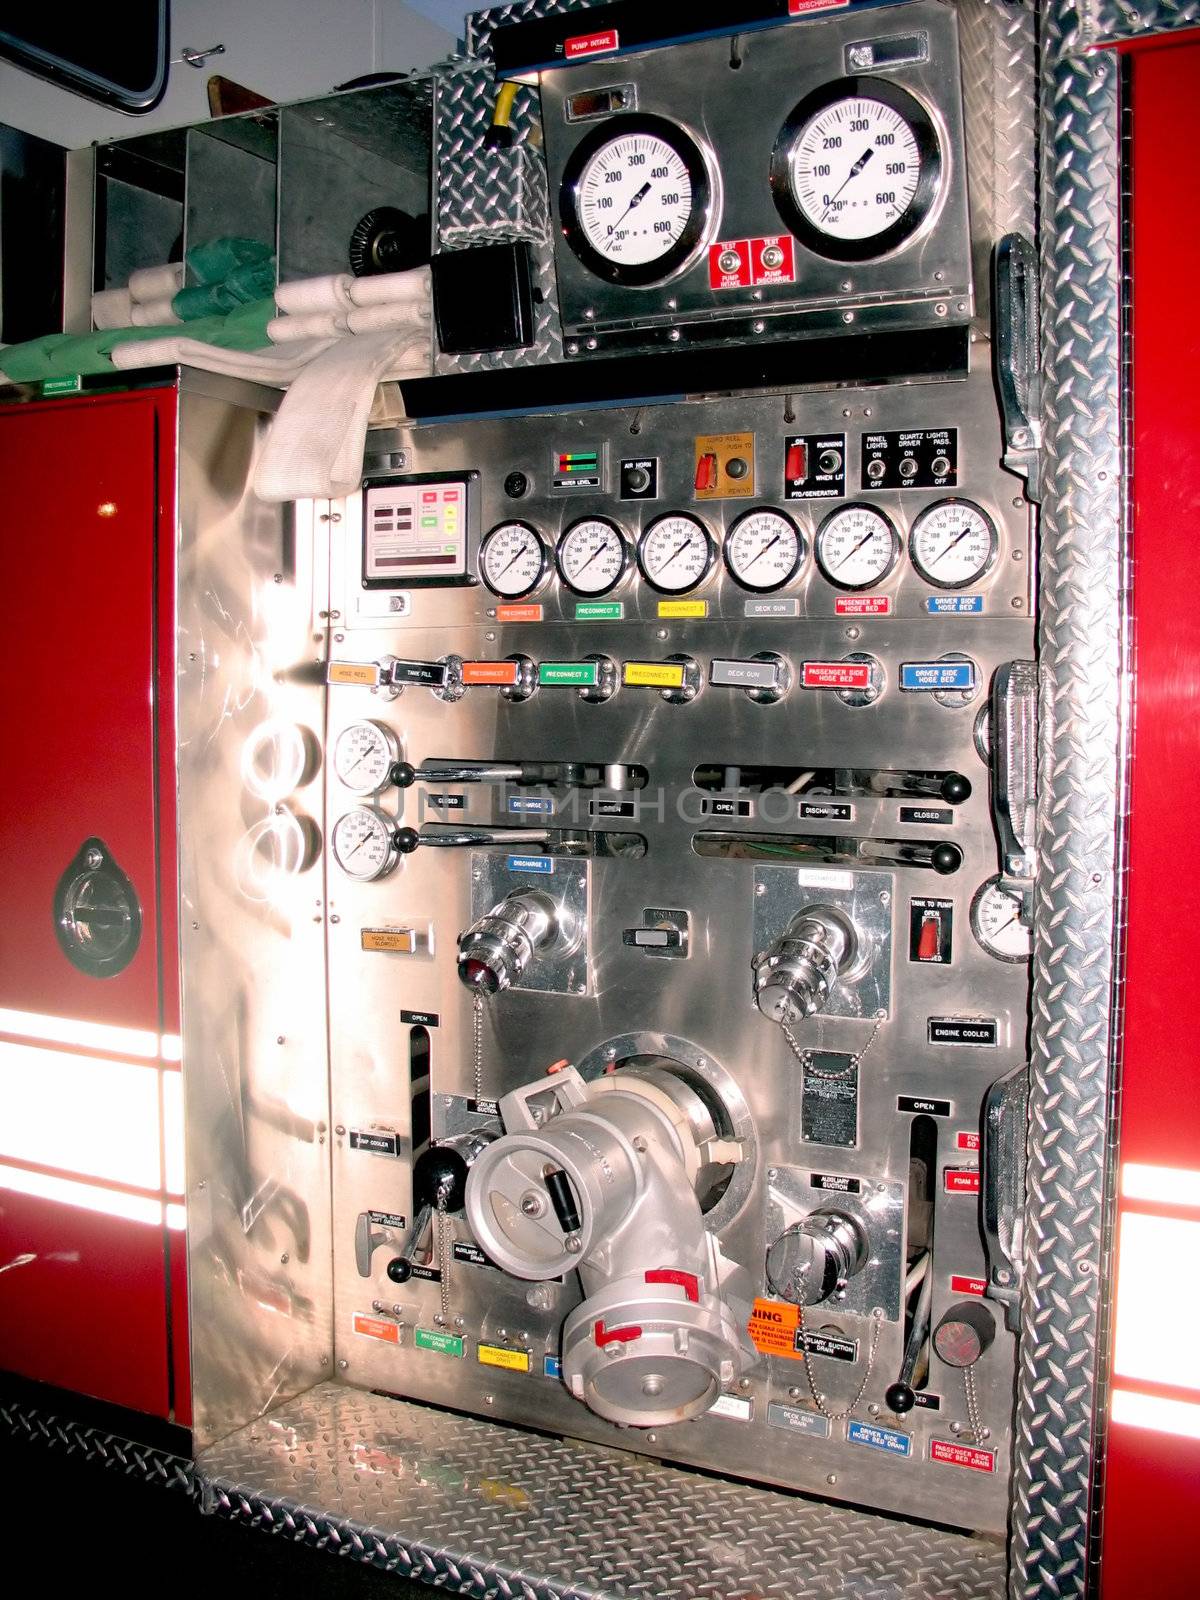 The side control panel of a modern fire engine.